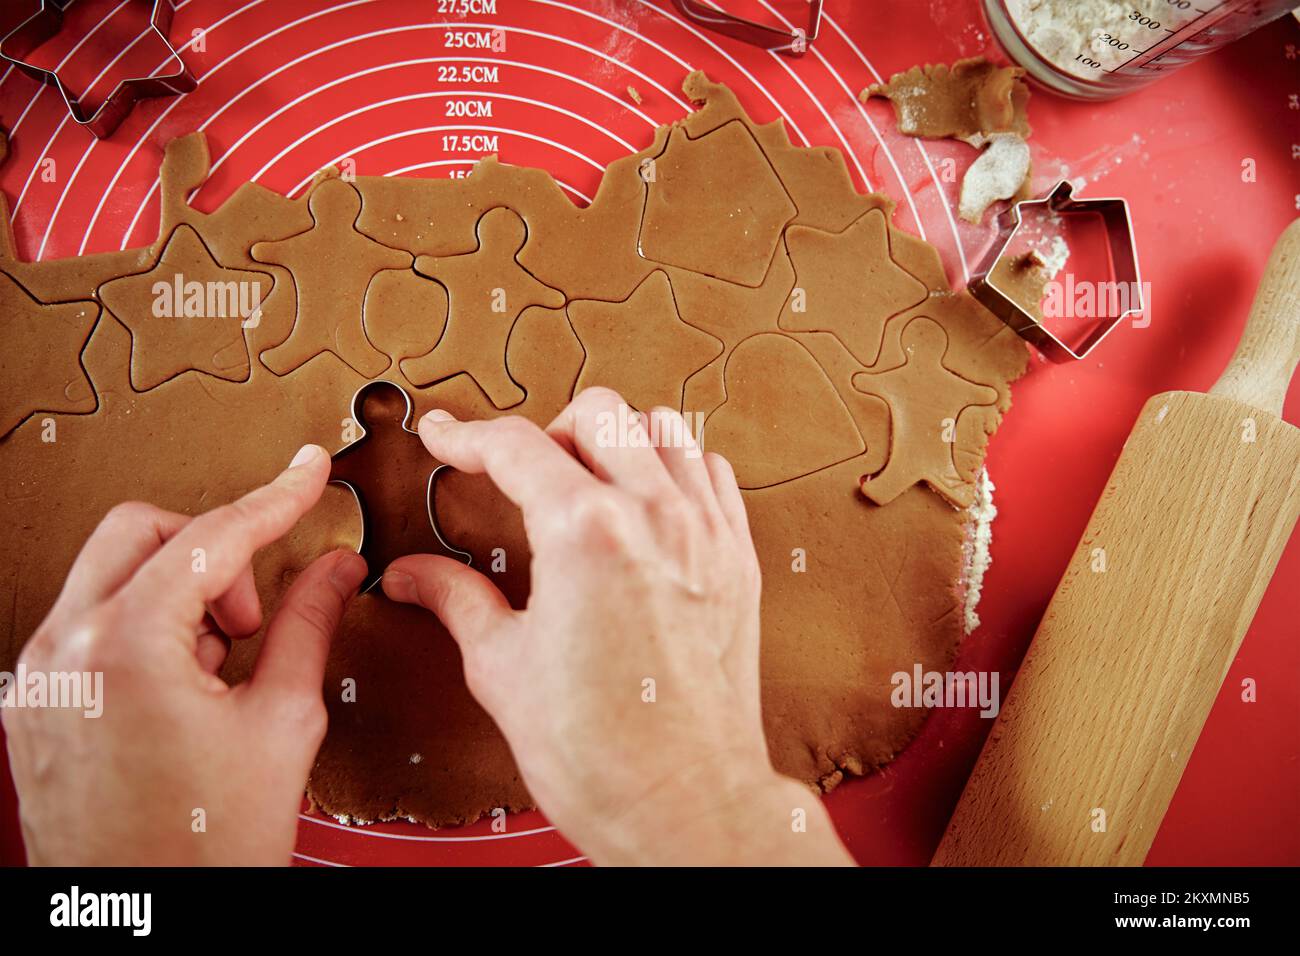 Woman preparing gingerbread cookies at kitchen. Female hands cutting ginger dough with cutter to making cookies for winter holidays Stock Photo